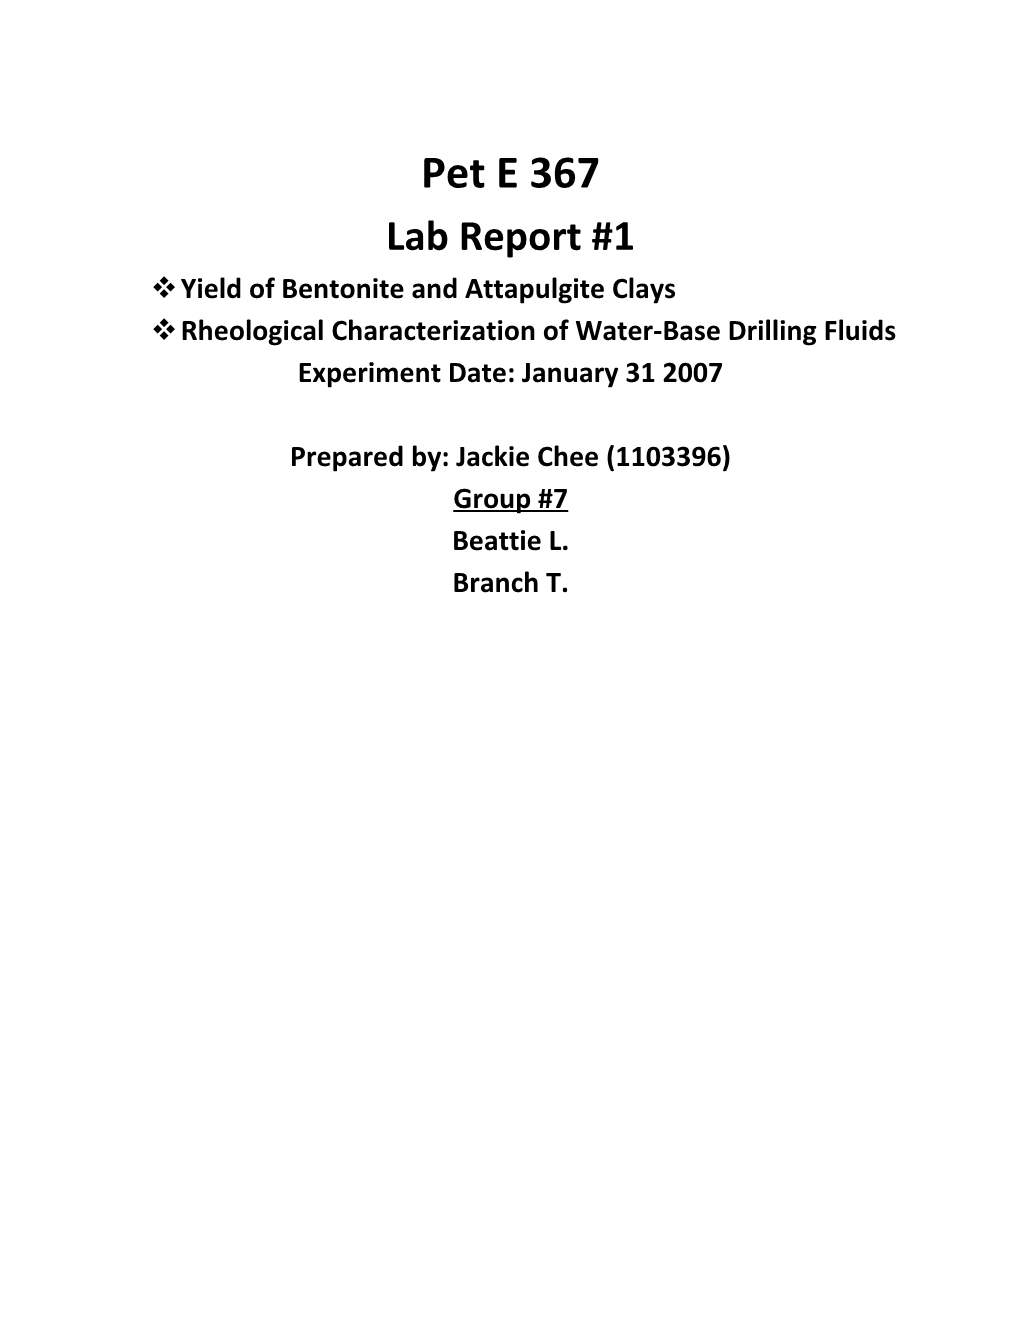 V Yield of Bentonite and Attapulgite Clays